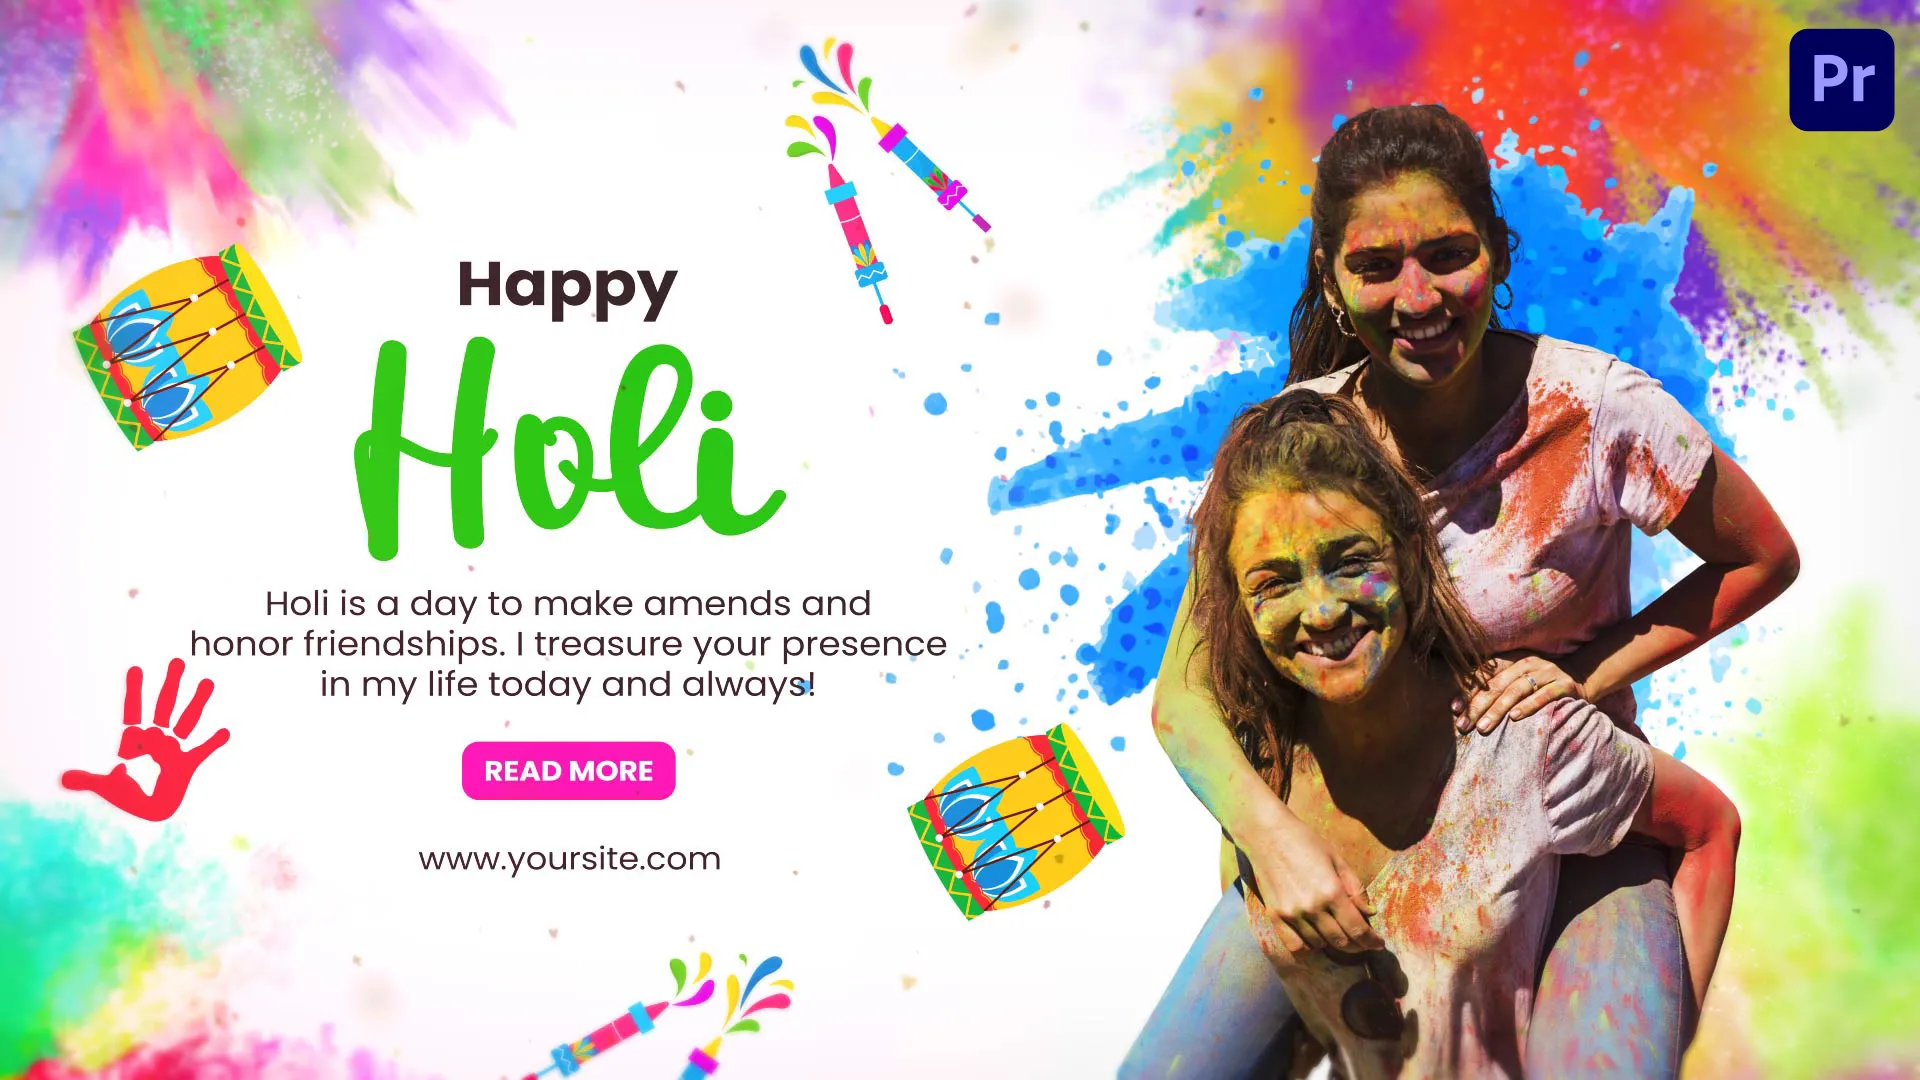 Colorful Holi Festival Wishes Video Display